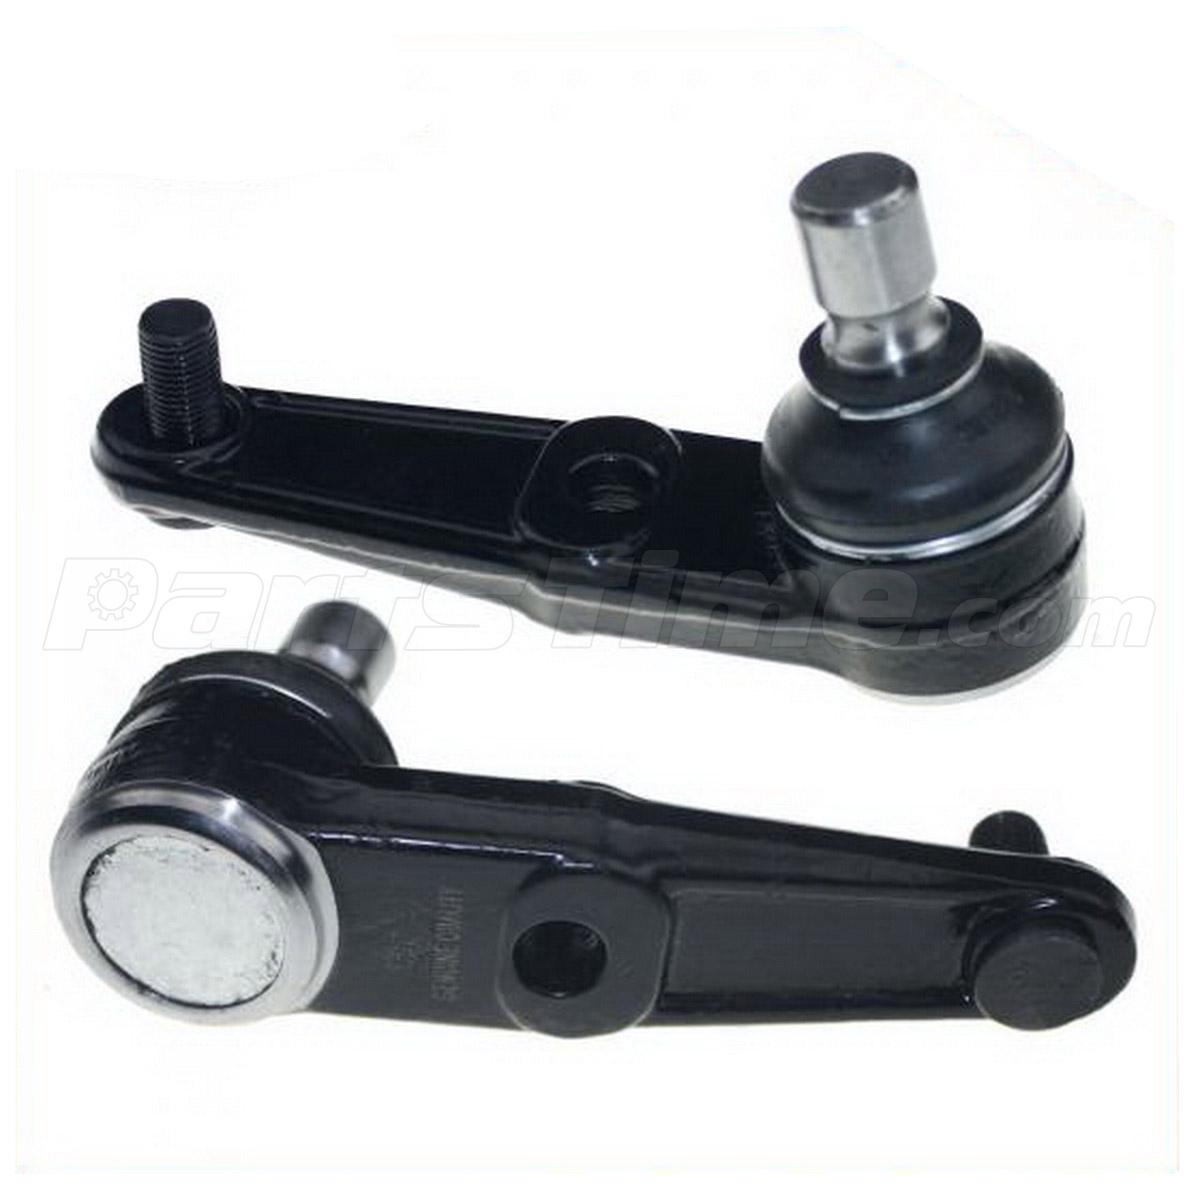 03 mazda protege ball joint